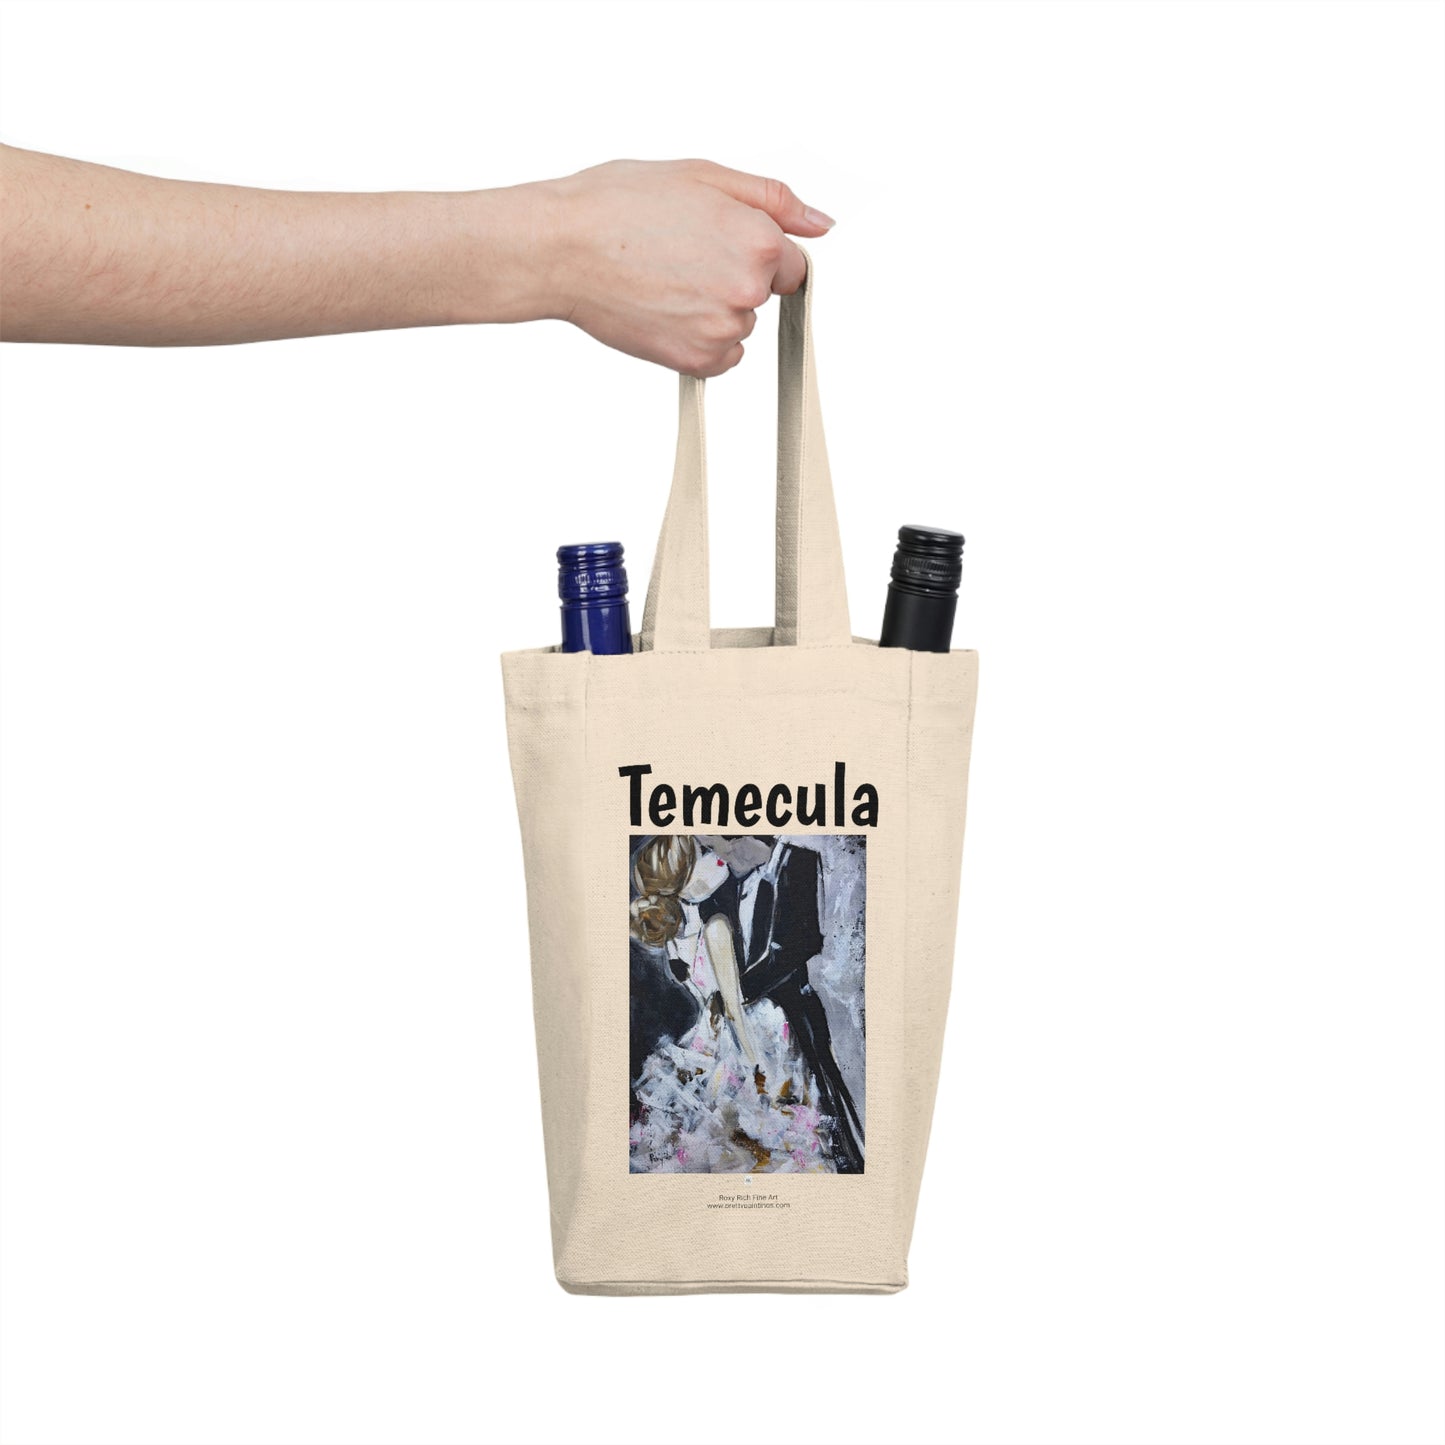 Temecula Double Wine Tote Bag featuring "Love" painting  Wedding Couple Kissing